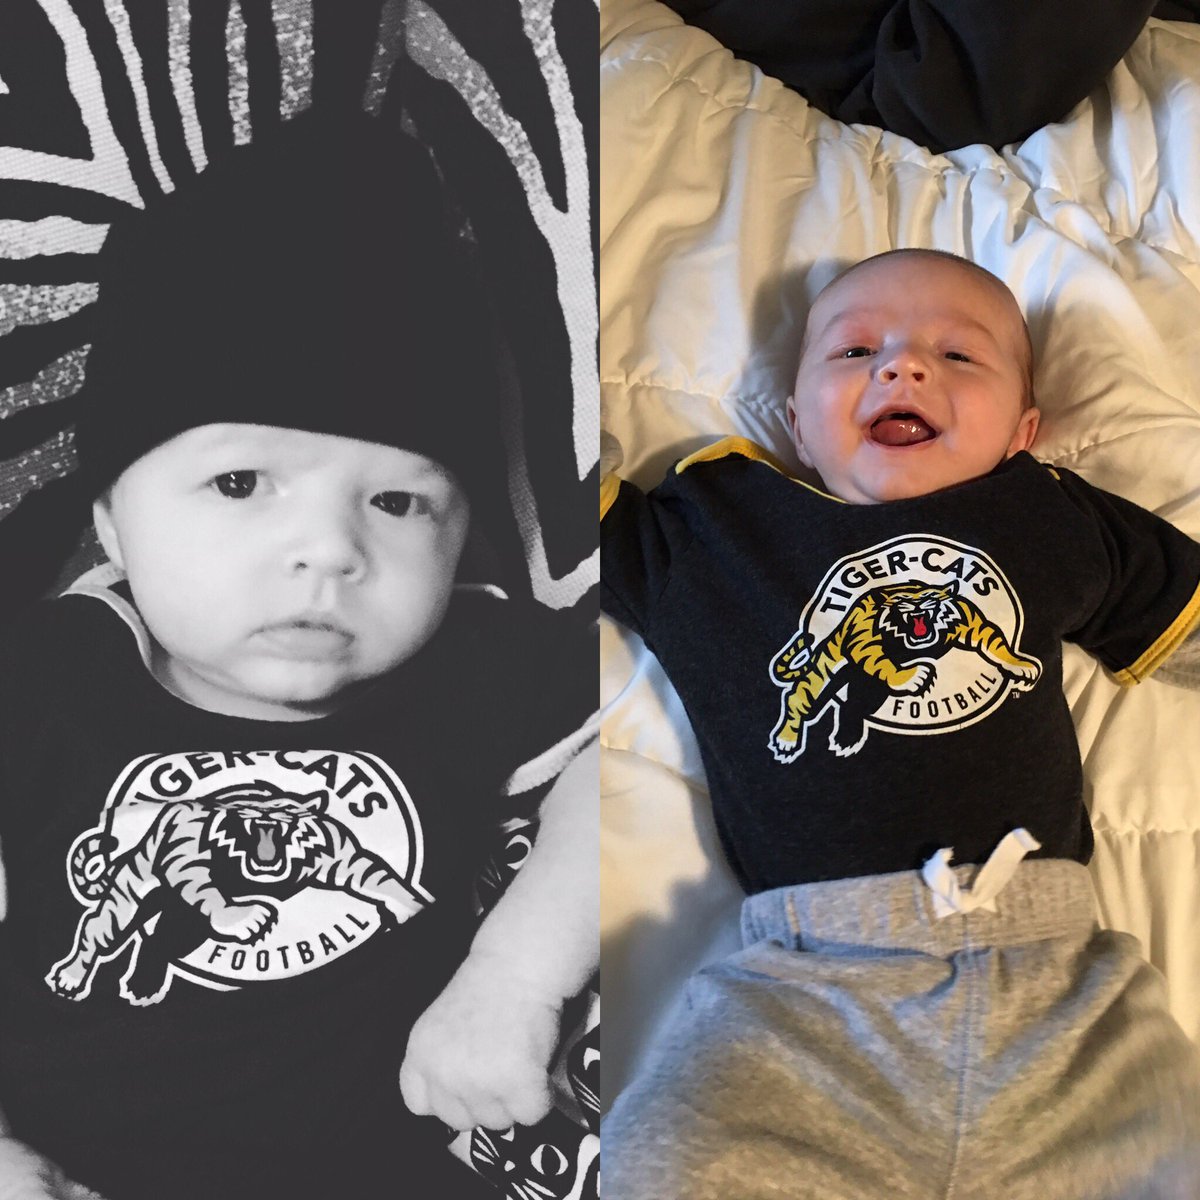 On the right regular season game. On the left someone is serious about playoffs @Ticats #WEARBLACK